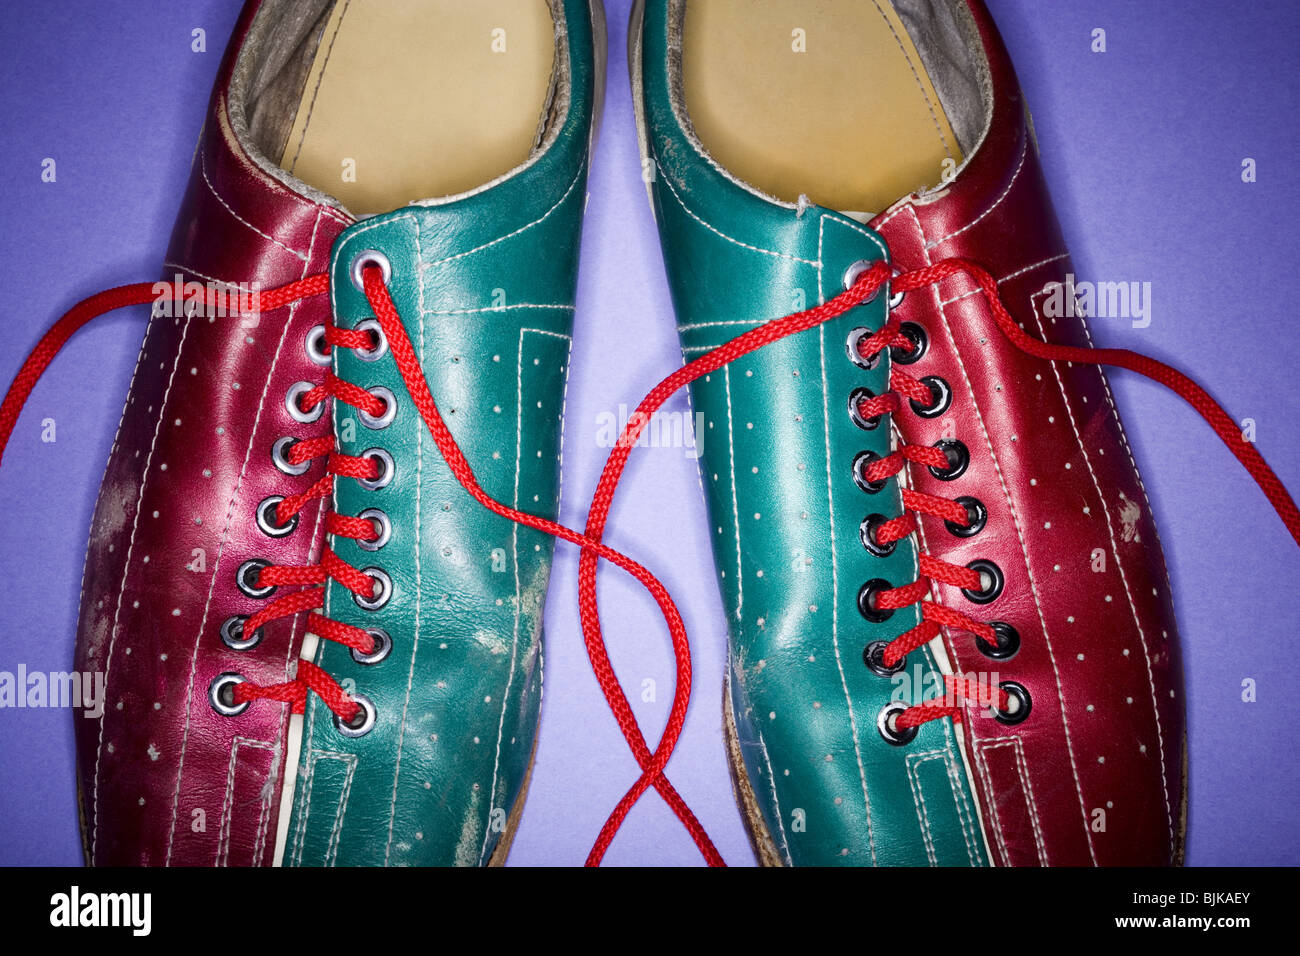 Overhead view of bowling shoes Stock Photo